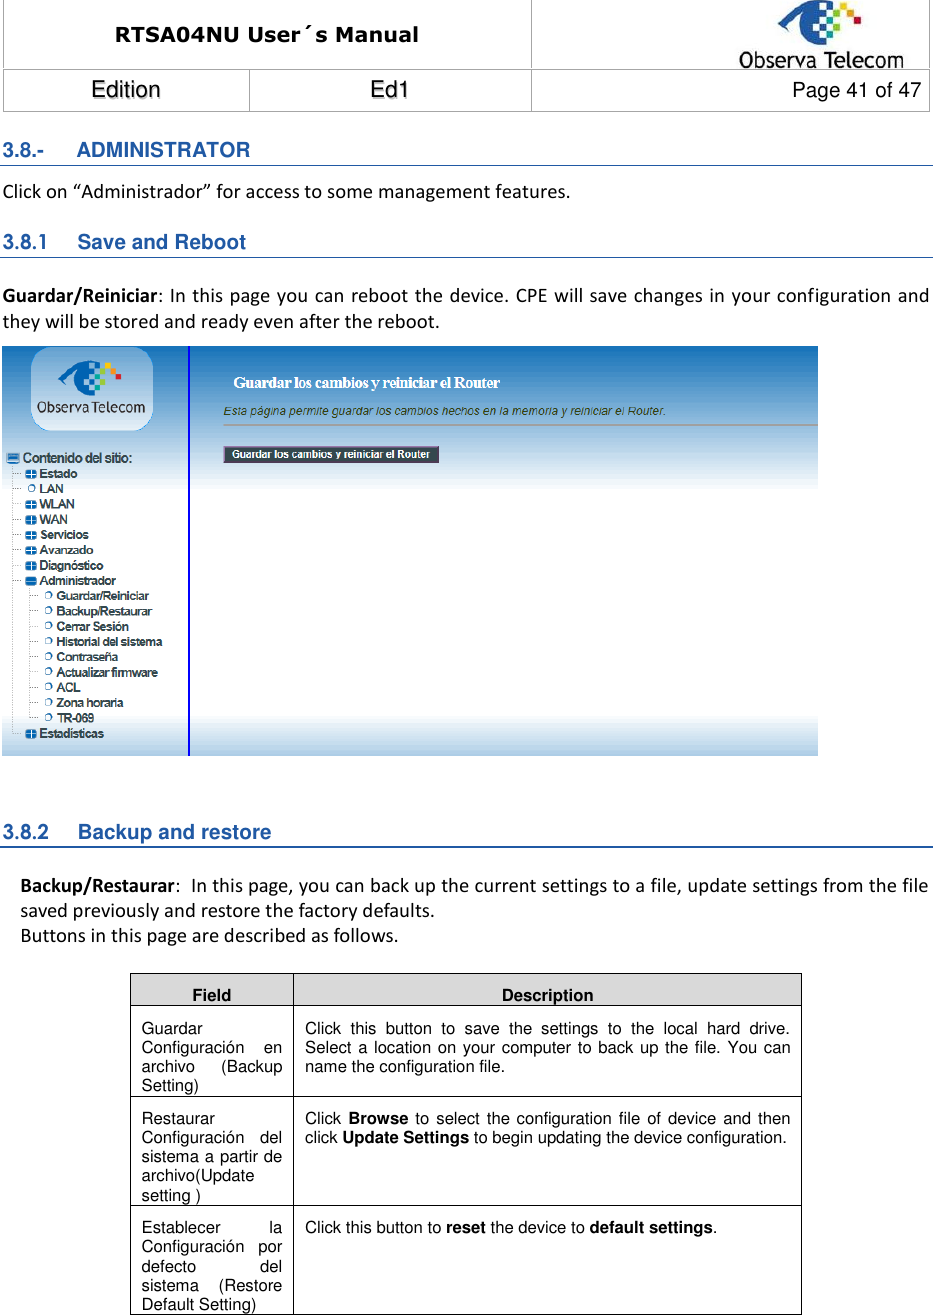 RTSA04NU User´s Manual  EEddiittiioonn  EEdd11  Page 41 of 47  3.8.-   ADMINISTRATOR Click on “Administrador” for access to some management features. 3.8.1  Save and Reboot Guardar/Reiniciar: In this page you can reboot the device. CPE will save changes in your configuration and they will be stored and ready even after the reboot.   3.8.2  Backup and restore Backup/Restaurar:  In this page, you can back up the current settings to a file, update settings from the file saved previously and restore the factory defaults. Buttons in this page are described as follows.  Field Description Guardar Configuración  en archivo  (Backup Setting) Click  this  button  to  save  the  settings  to  the  local  hard  drive. Select a location on your computer to back up the file. You can name the configuration file. Restaurar Configuración  del sistema a partir de archivo(Update setting ) Click Browse to  select the configuration file  of device and then click Update Settings to begin updating the device configuration. Establecer  la Configuración  por defecto  del sistema  (Restore Default Setting) Click this button to reset the device to default settings.  